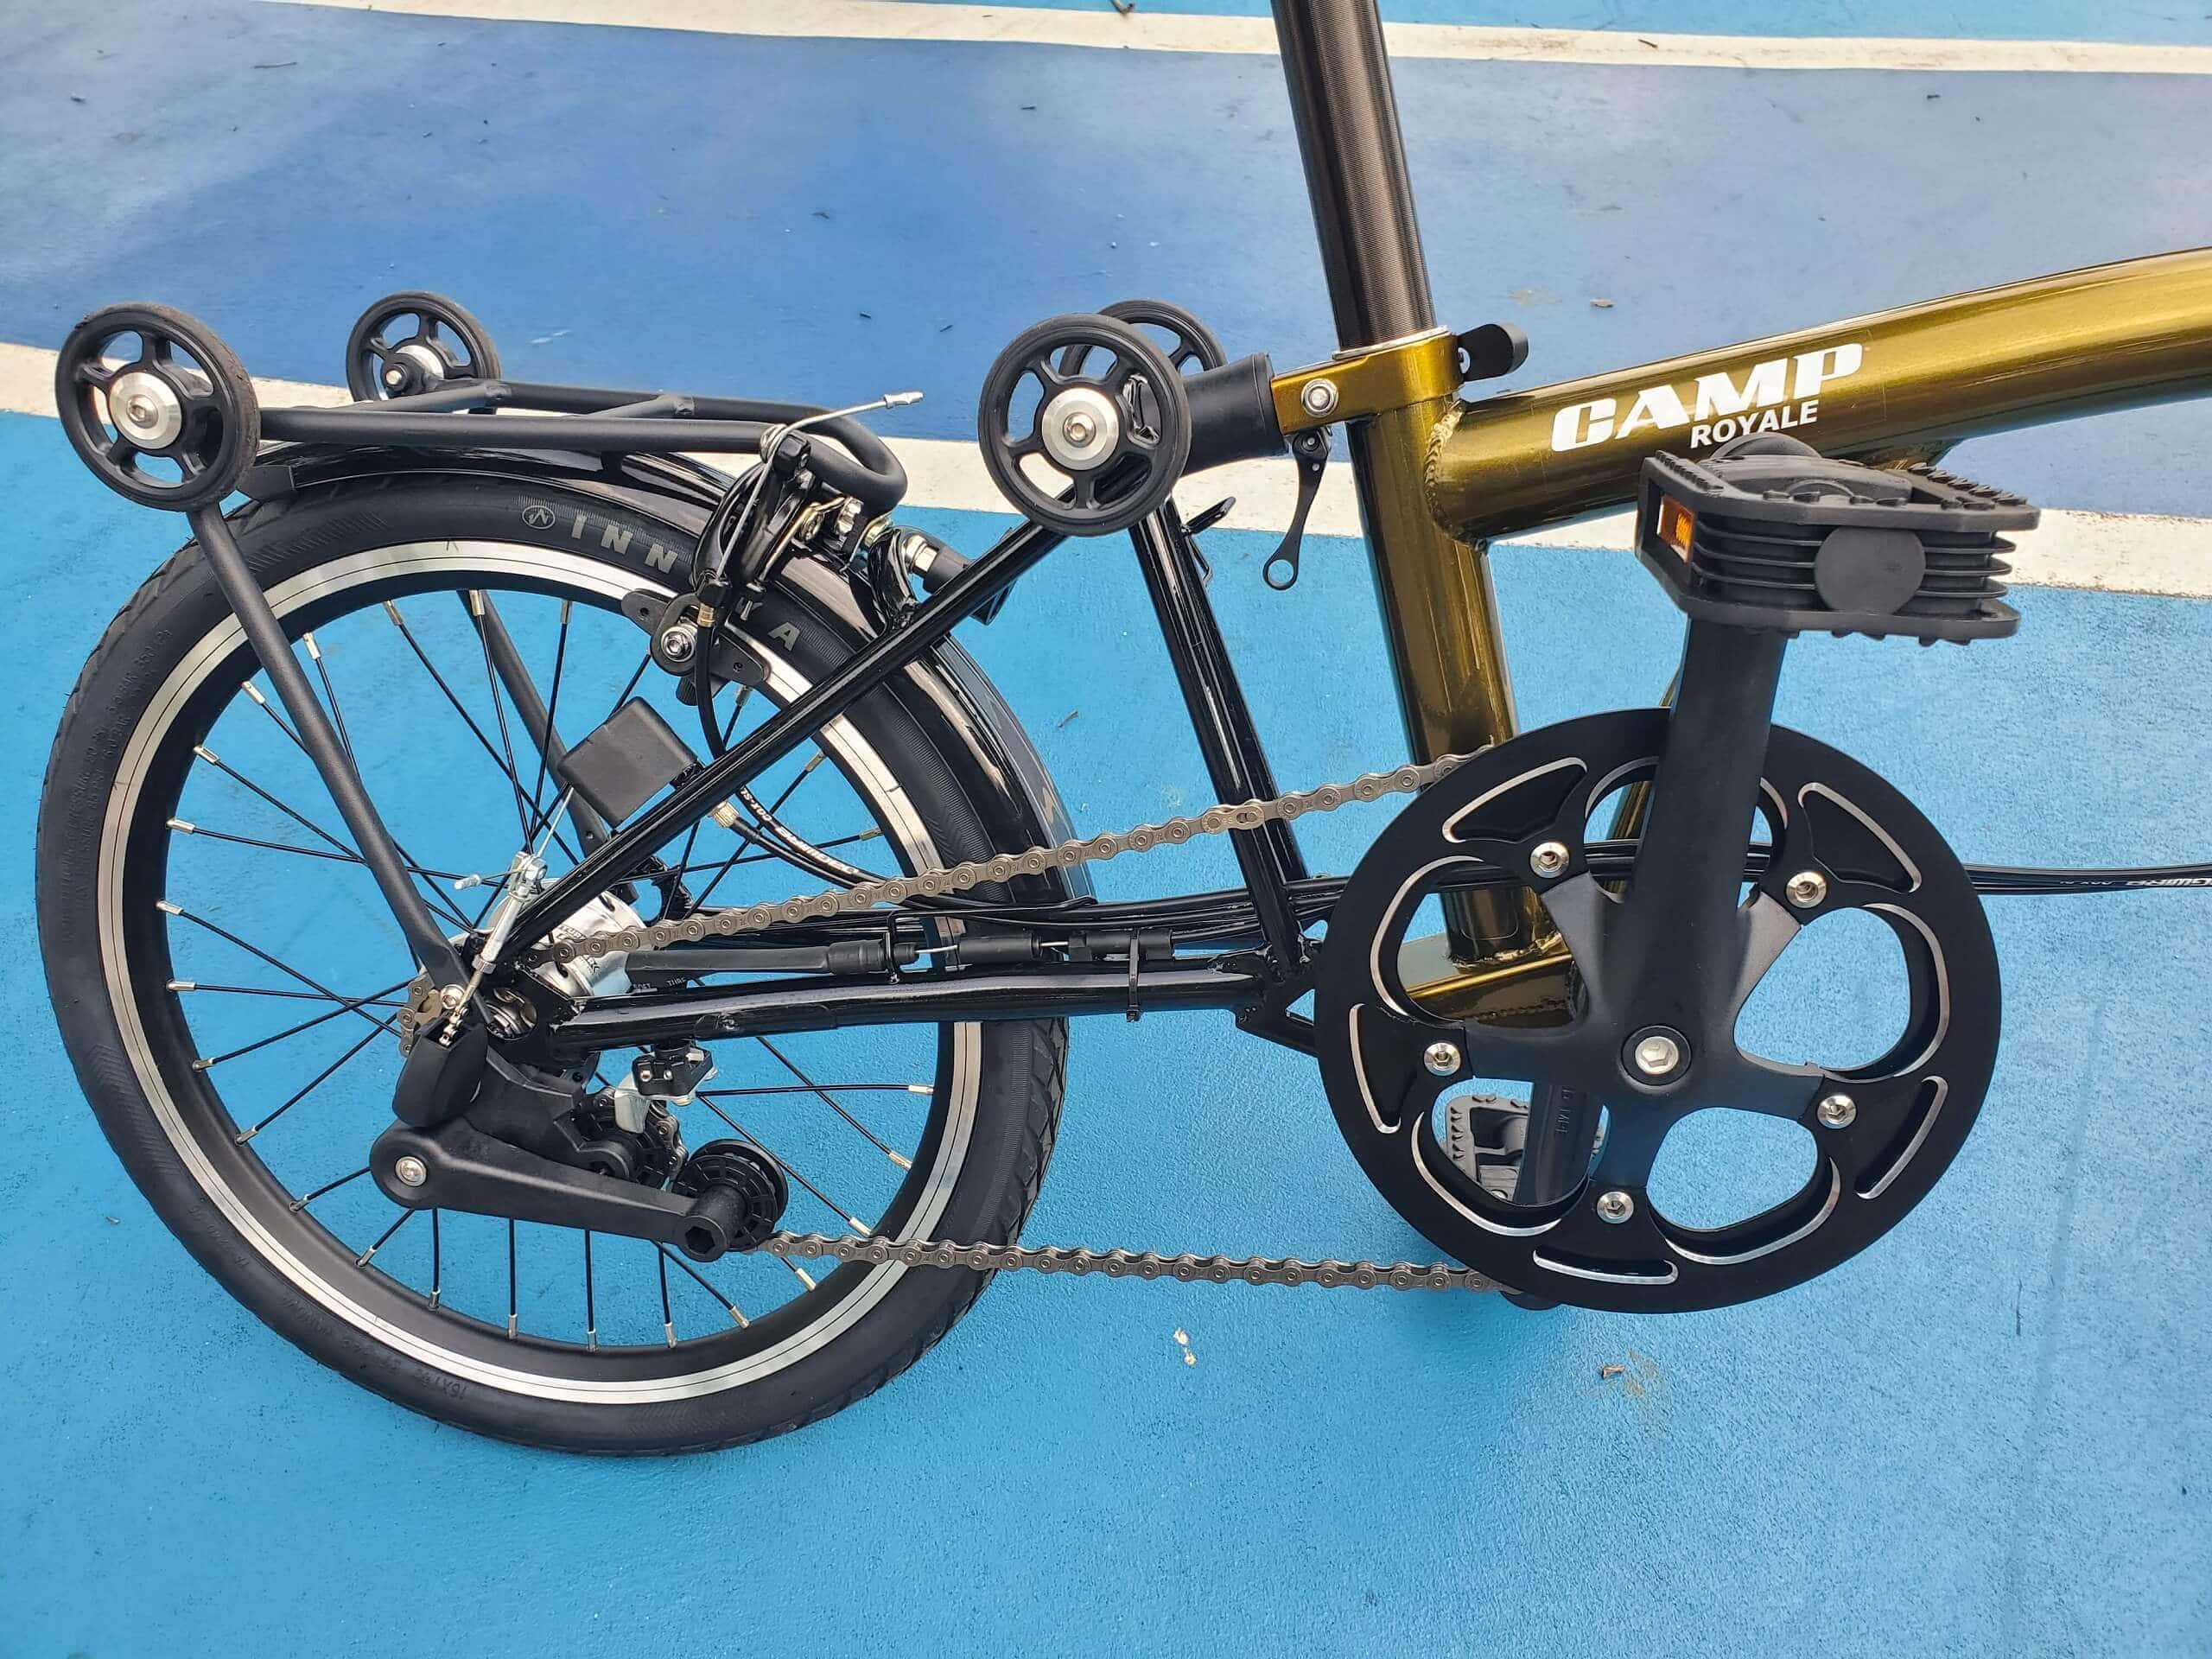 CAMP ROYALE GOLD foldable bicycle drive train Nick - A bicycle for Singapore | CAMP ROYALE